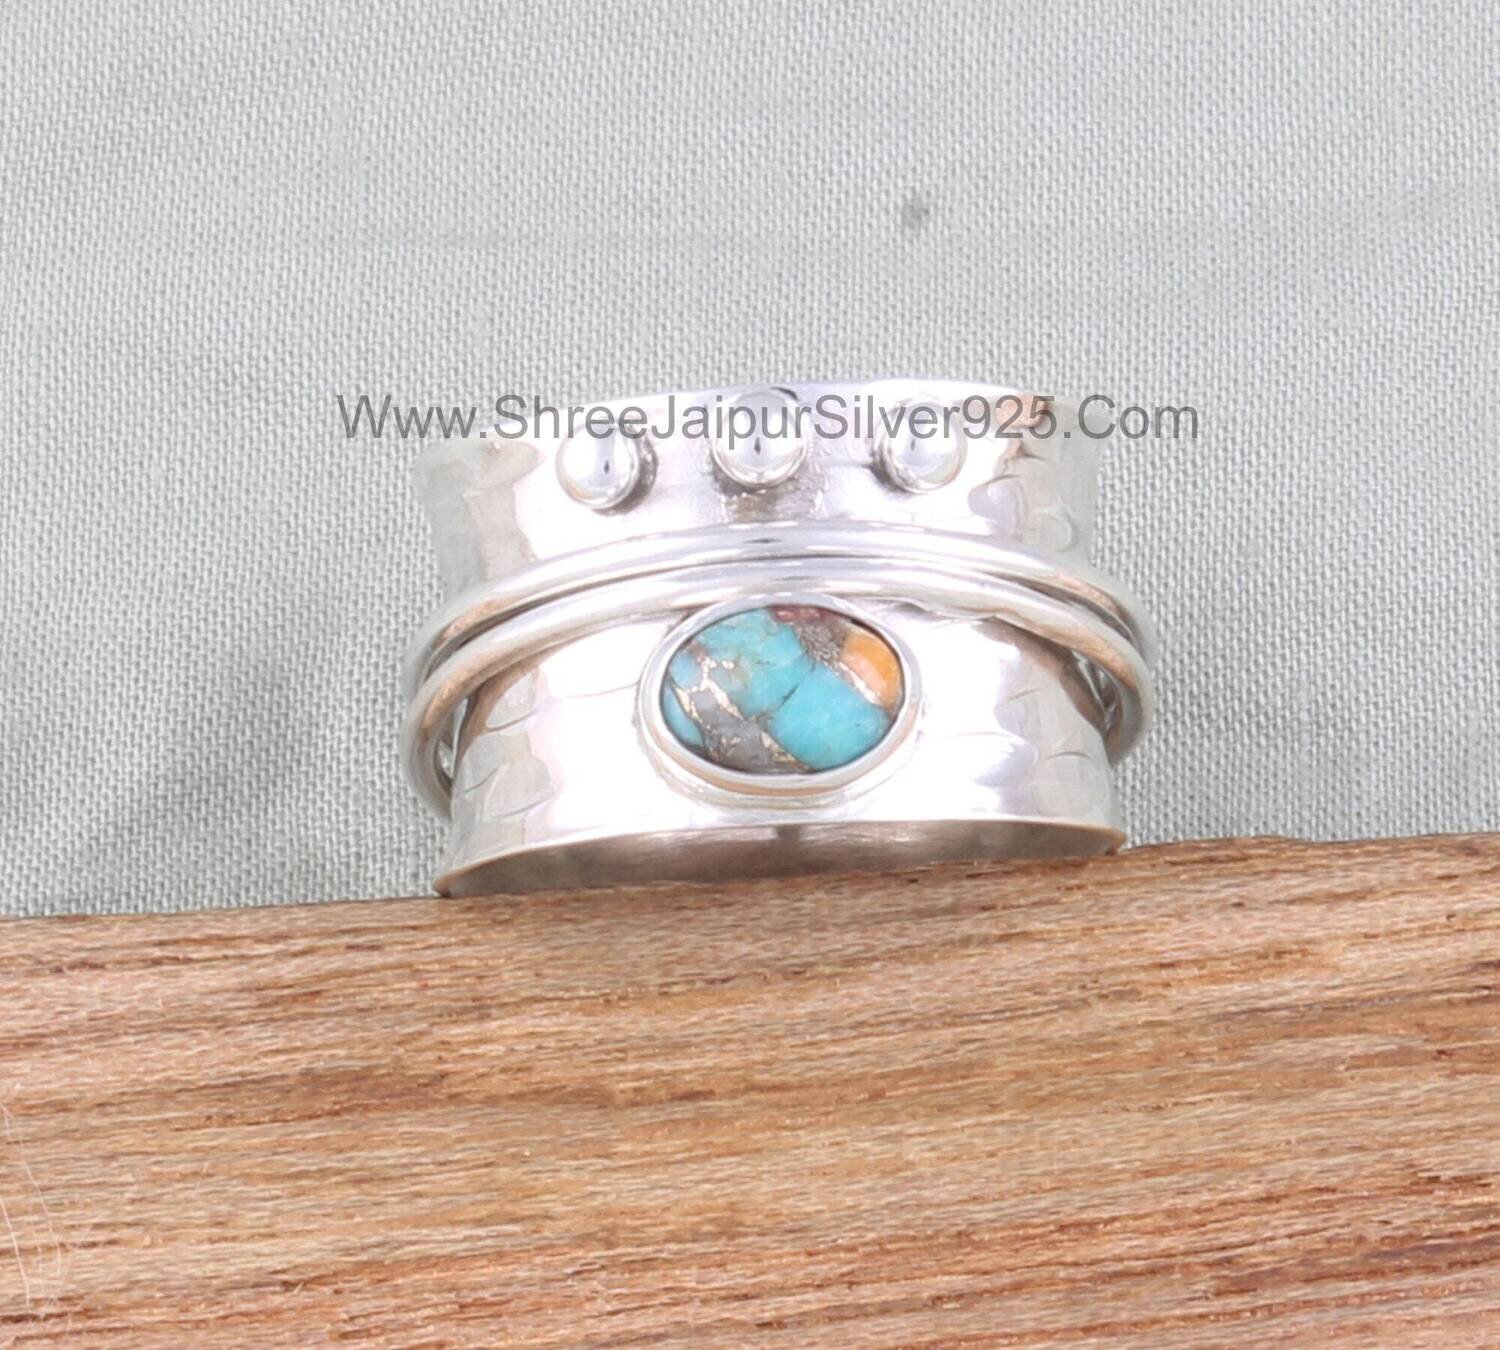 Oyster Copper Turquoise Solid 925 Sterling Silver Spinner Ring For Women, Handmade Oval Meditation Wedding Ring Boho Worry Anxiety Ring Gift